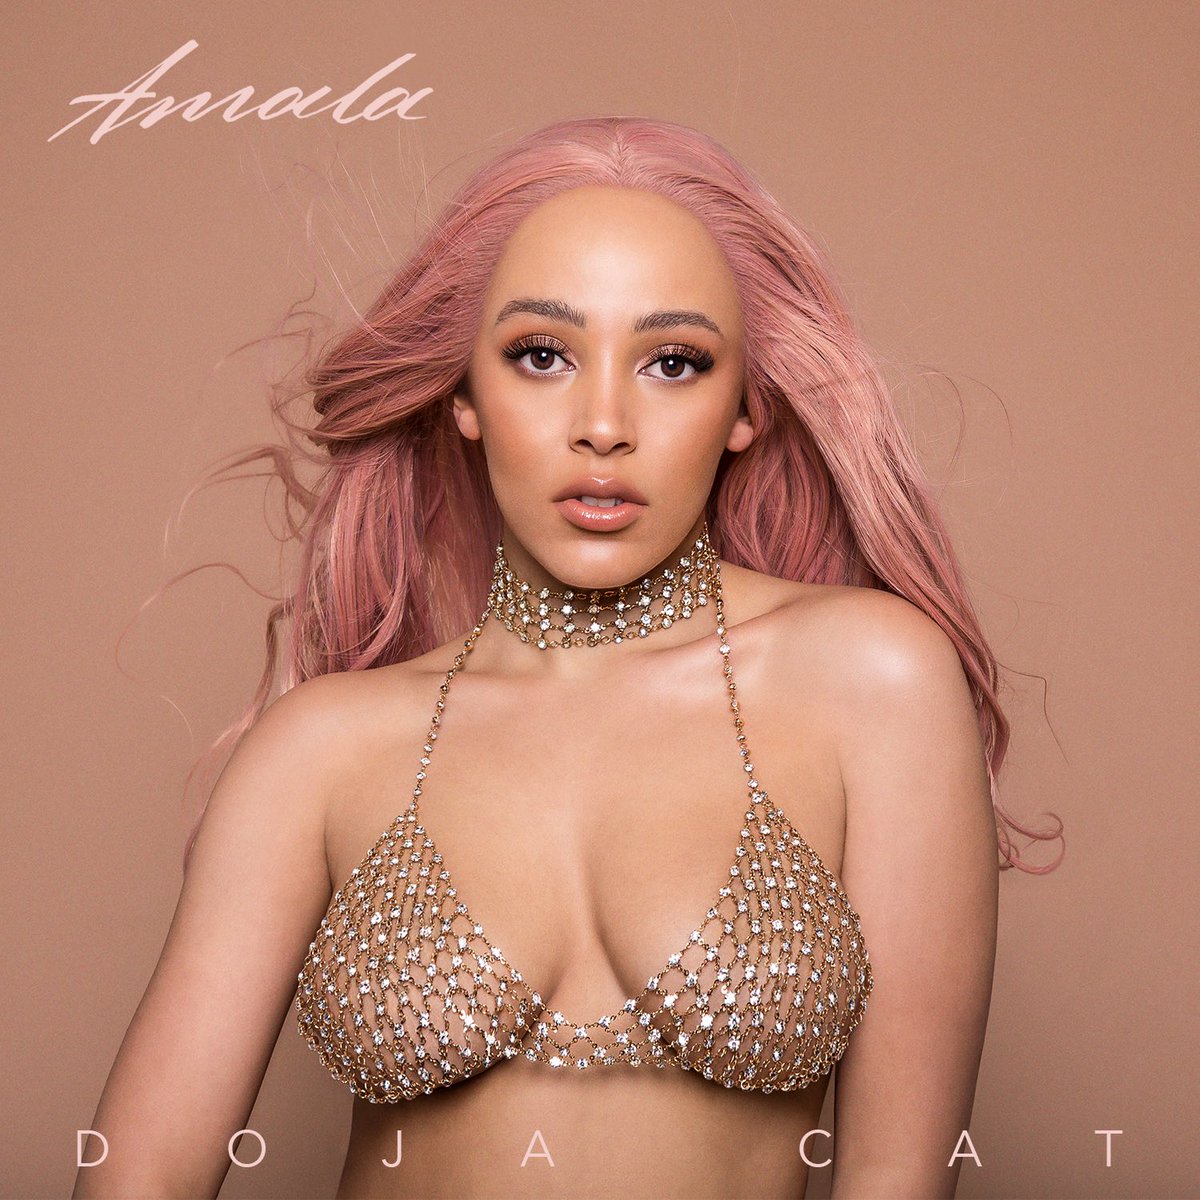 Doja Cat Is Back With Her “Amala” Debut